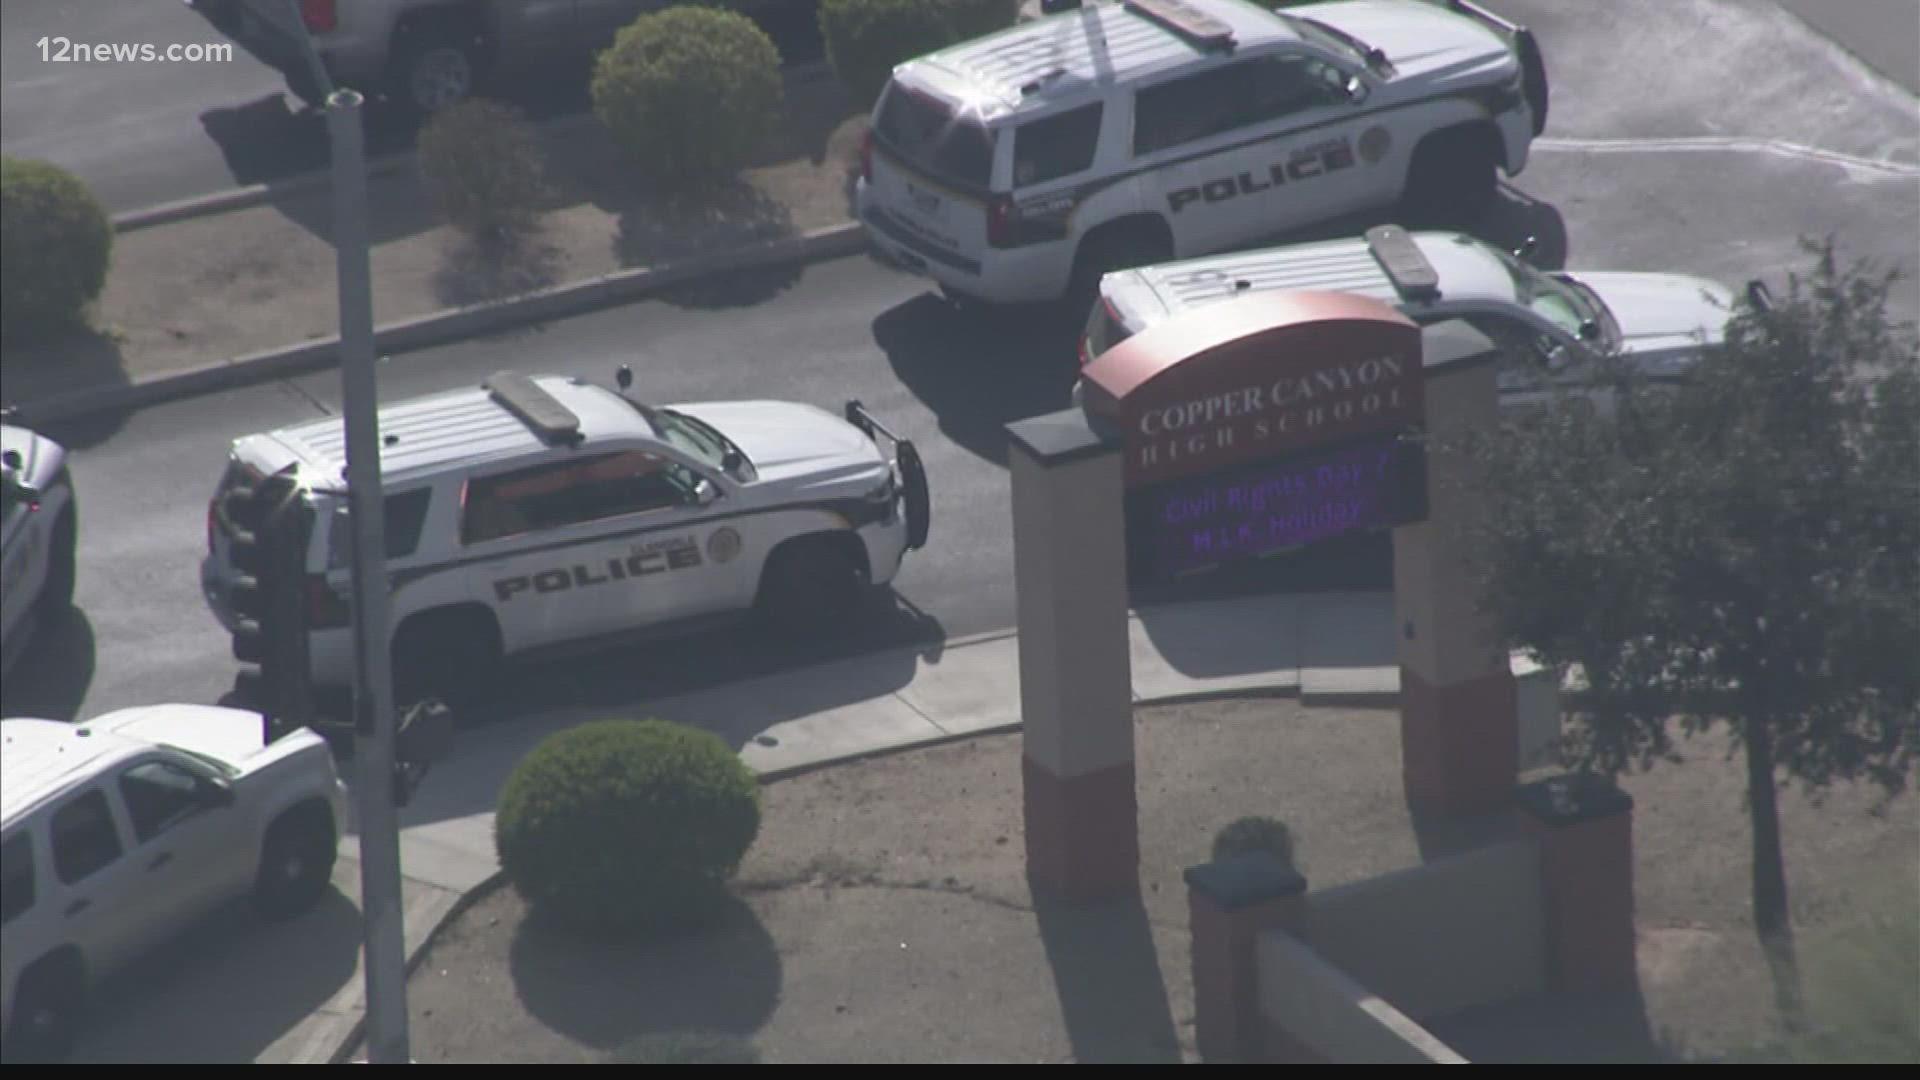 A high school in Glendale was on lockdown Thursday after police received reports that someone brought a gun onto campus. The suspect is in custody.